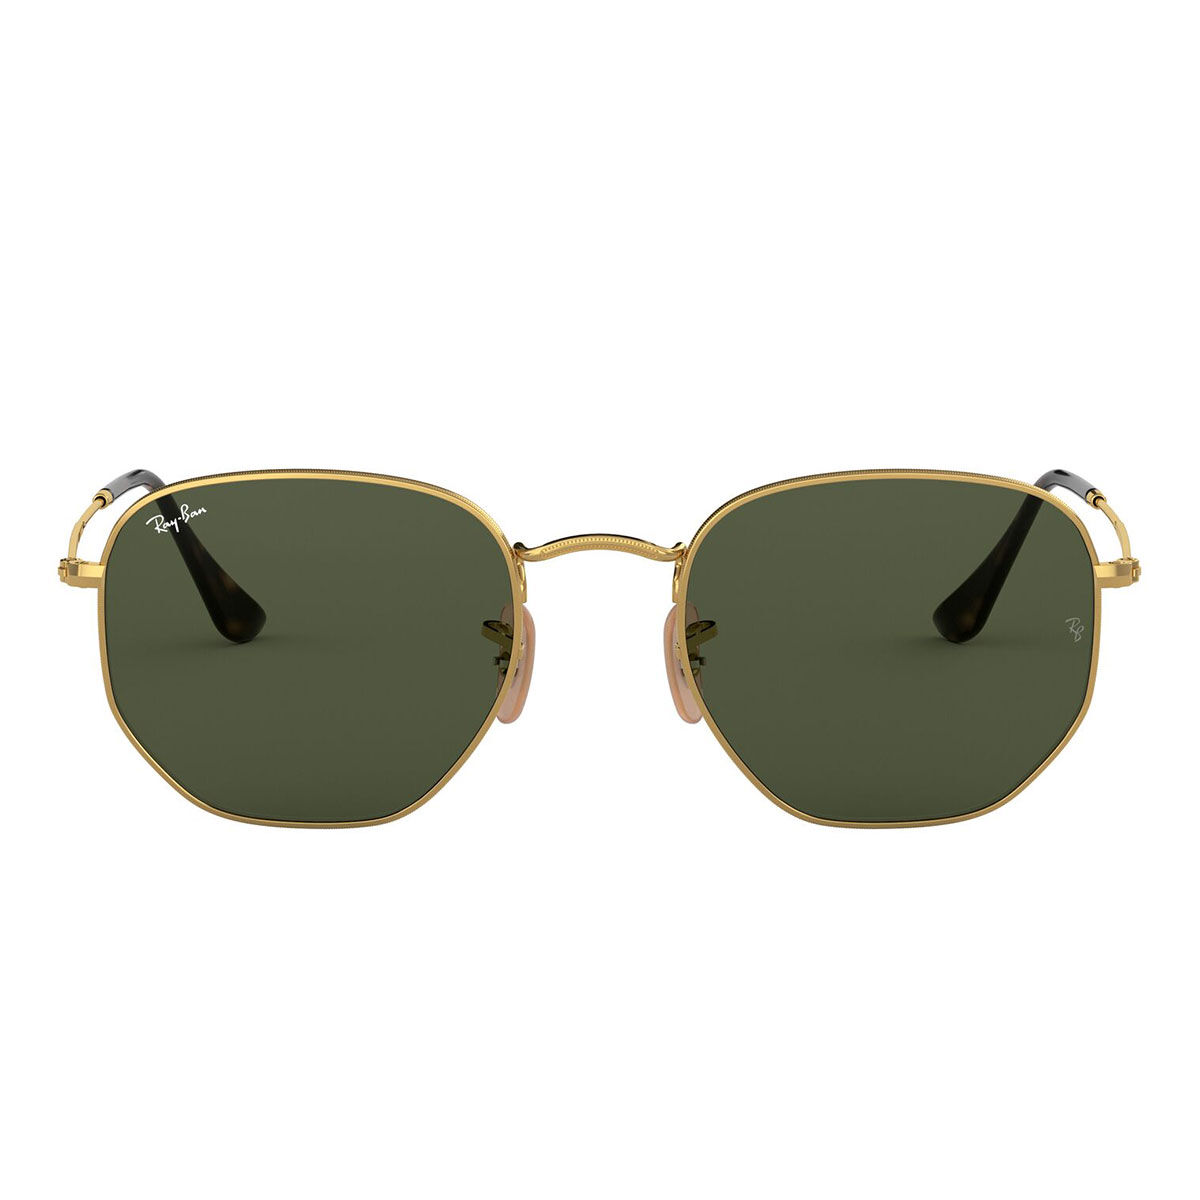 Sonnenbrille Ray-Ban Sechseck RB3548N 001 Oro Unisex